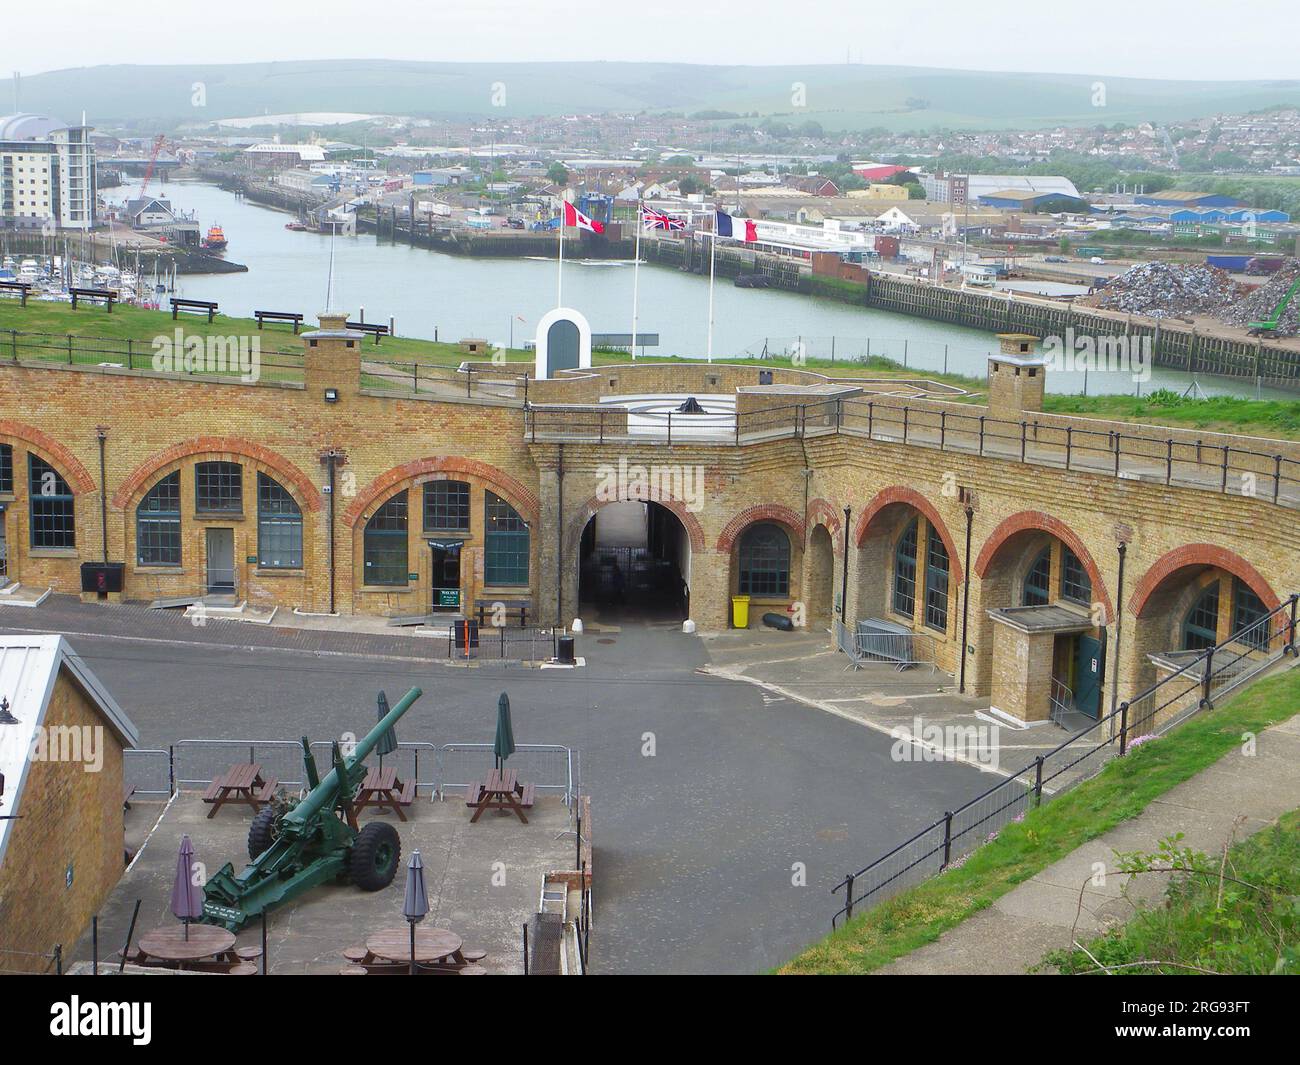 View of Newhaven Fort, East Sussex, built in the 1860s and still in use during the First and Second World Wars.  It was neglected for a time, but has now been redeveloped into a popular visitor centre. Stock Photo